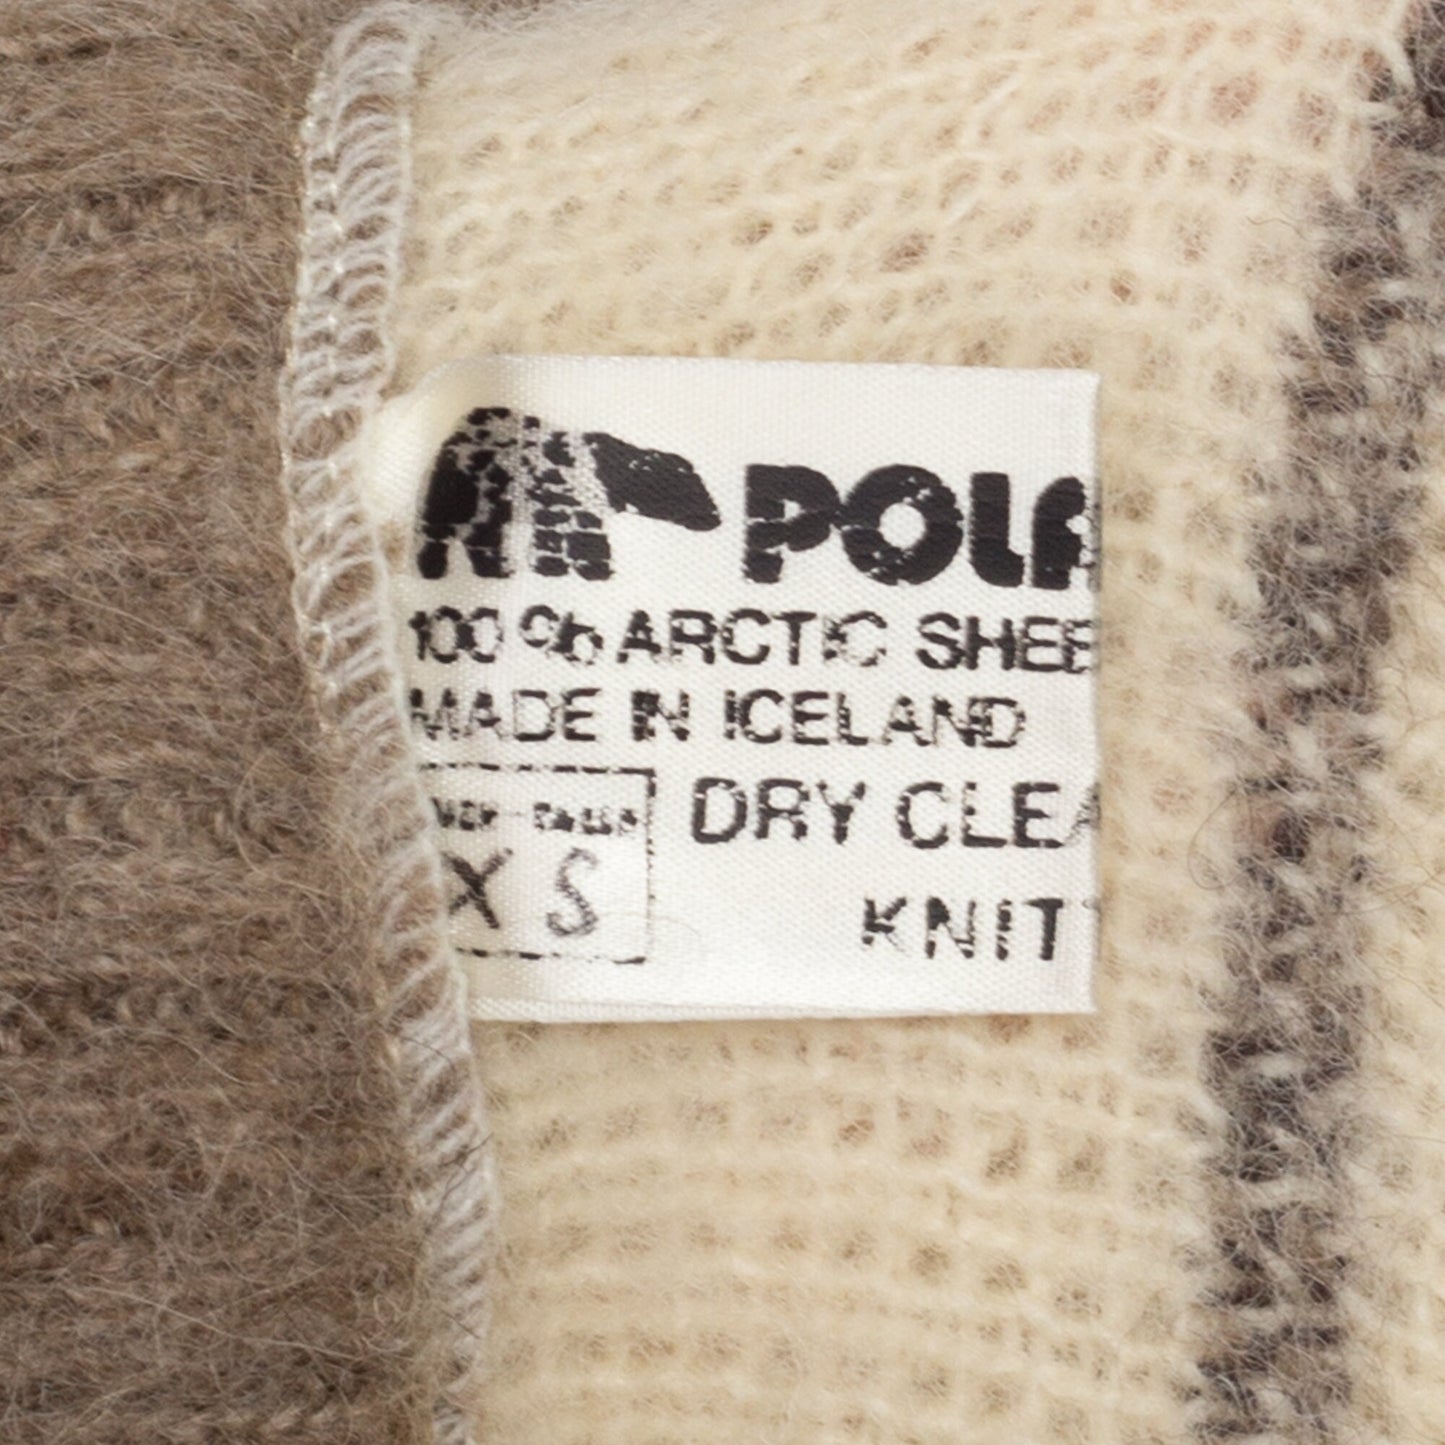 XS-Sm 70s Icelandic Fair Isle Sweater | Vintage Nordic Lopi Lopapeysa Hand Knit Wool Pullover Jumper